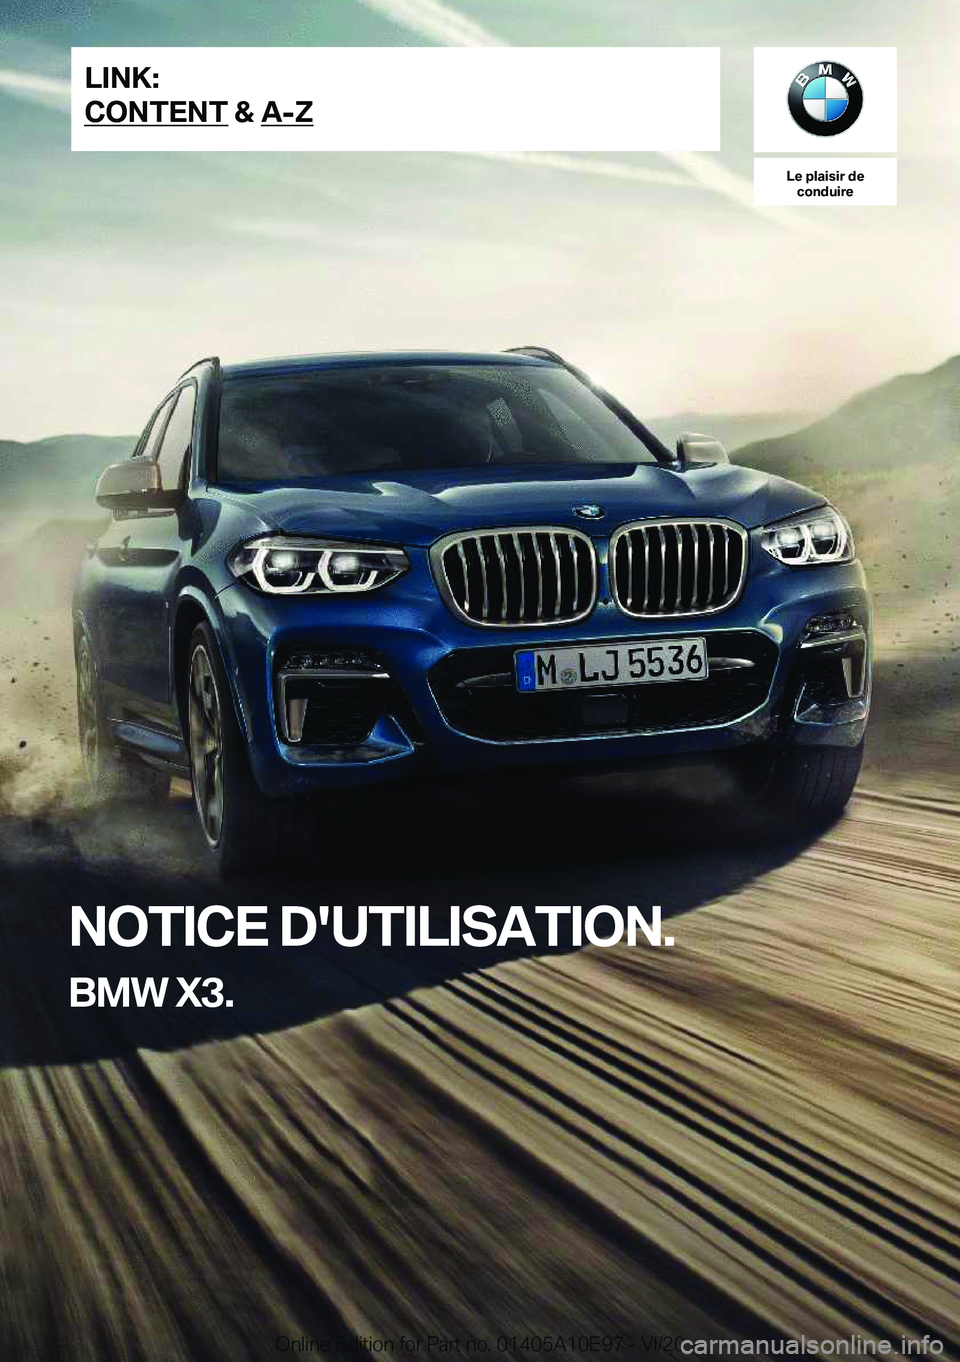 BMW X3 2021  Notices Demploi (in French) �L�e��p�l�a�i�s�i�r��d�e�c�o�n�d�u�i�r�e
�N�O�T�I�C�E��D�'�U�T�I�L�I�S�A�T�I�O�N�.
�B�M�W��X�3�.�L�I�N�K�:
�C�O�N�T�E�N�T��&��A�-�Z�O�n�l�i�n�e��E�d�i�t�i�o�n��f�o�r��P�a�r�t��n�o�.��0�